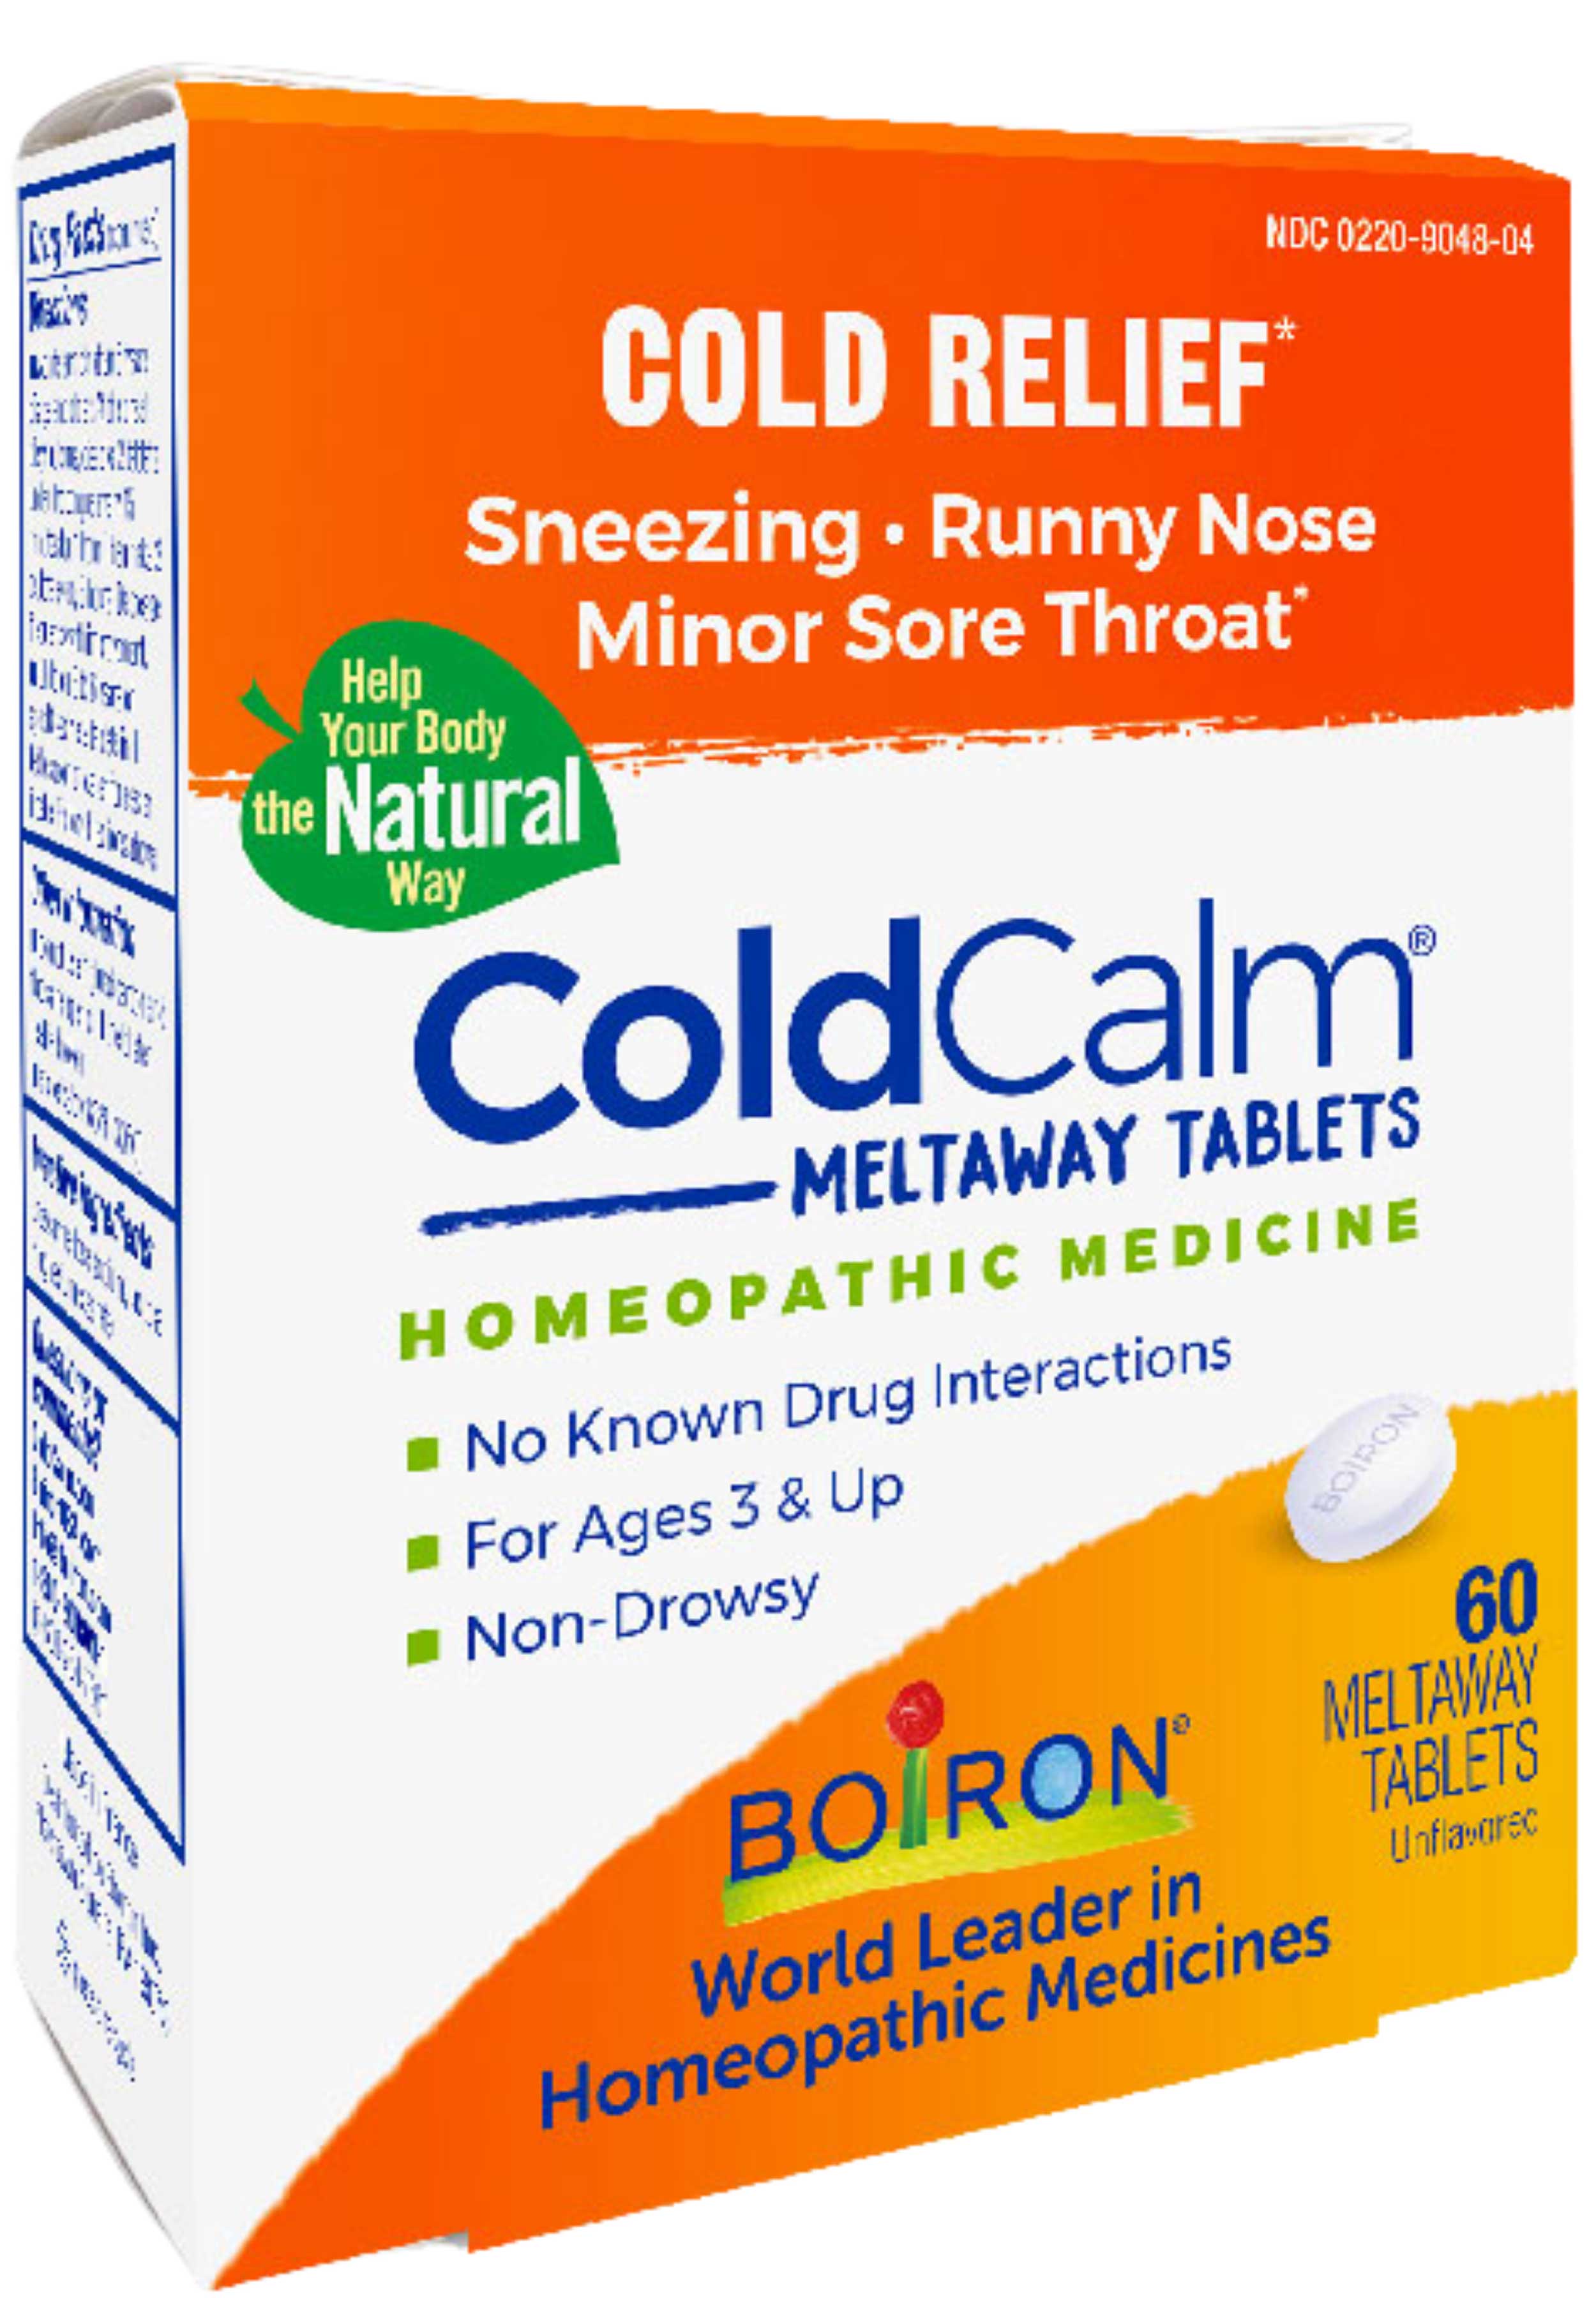 Boiron Homeopathics Coldcalm 